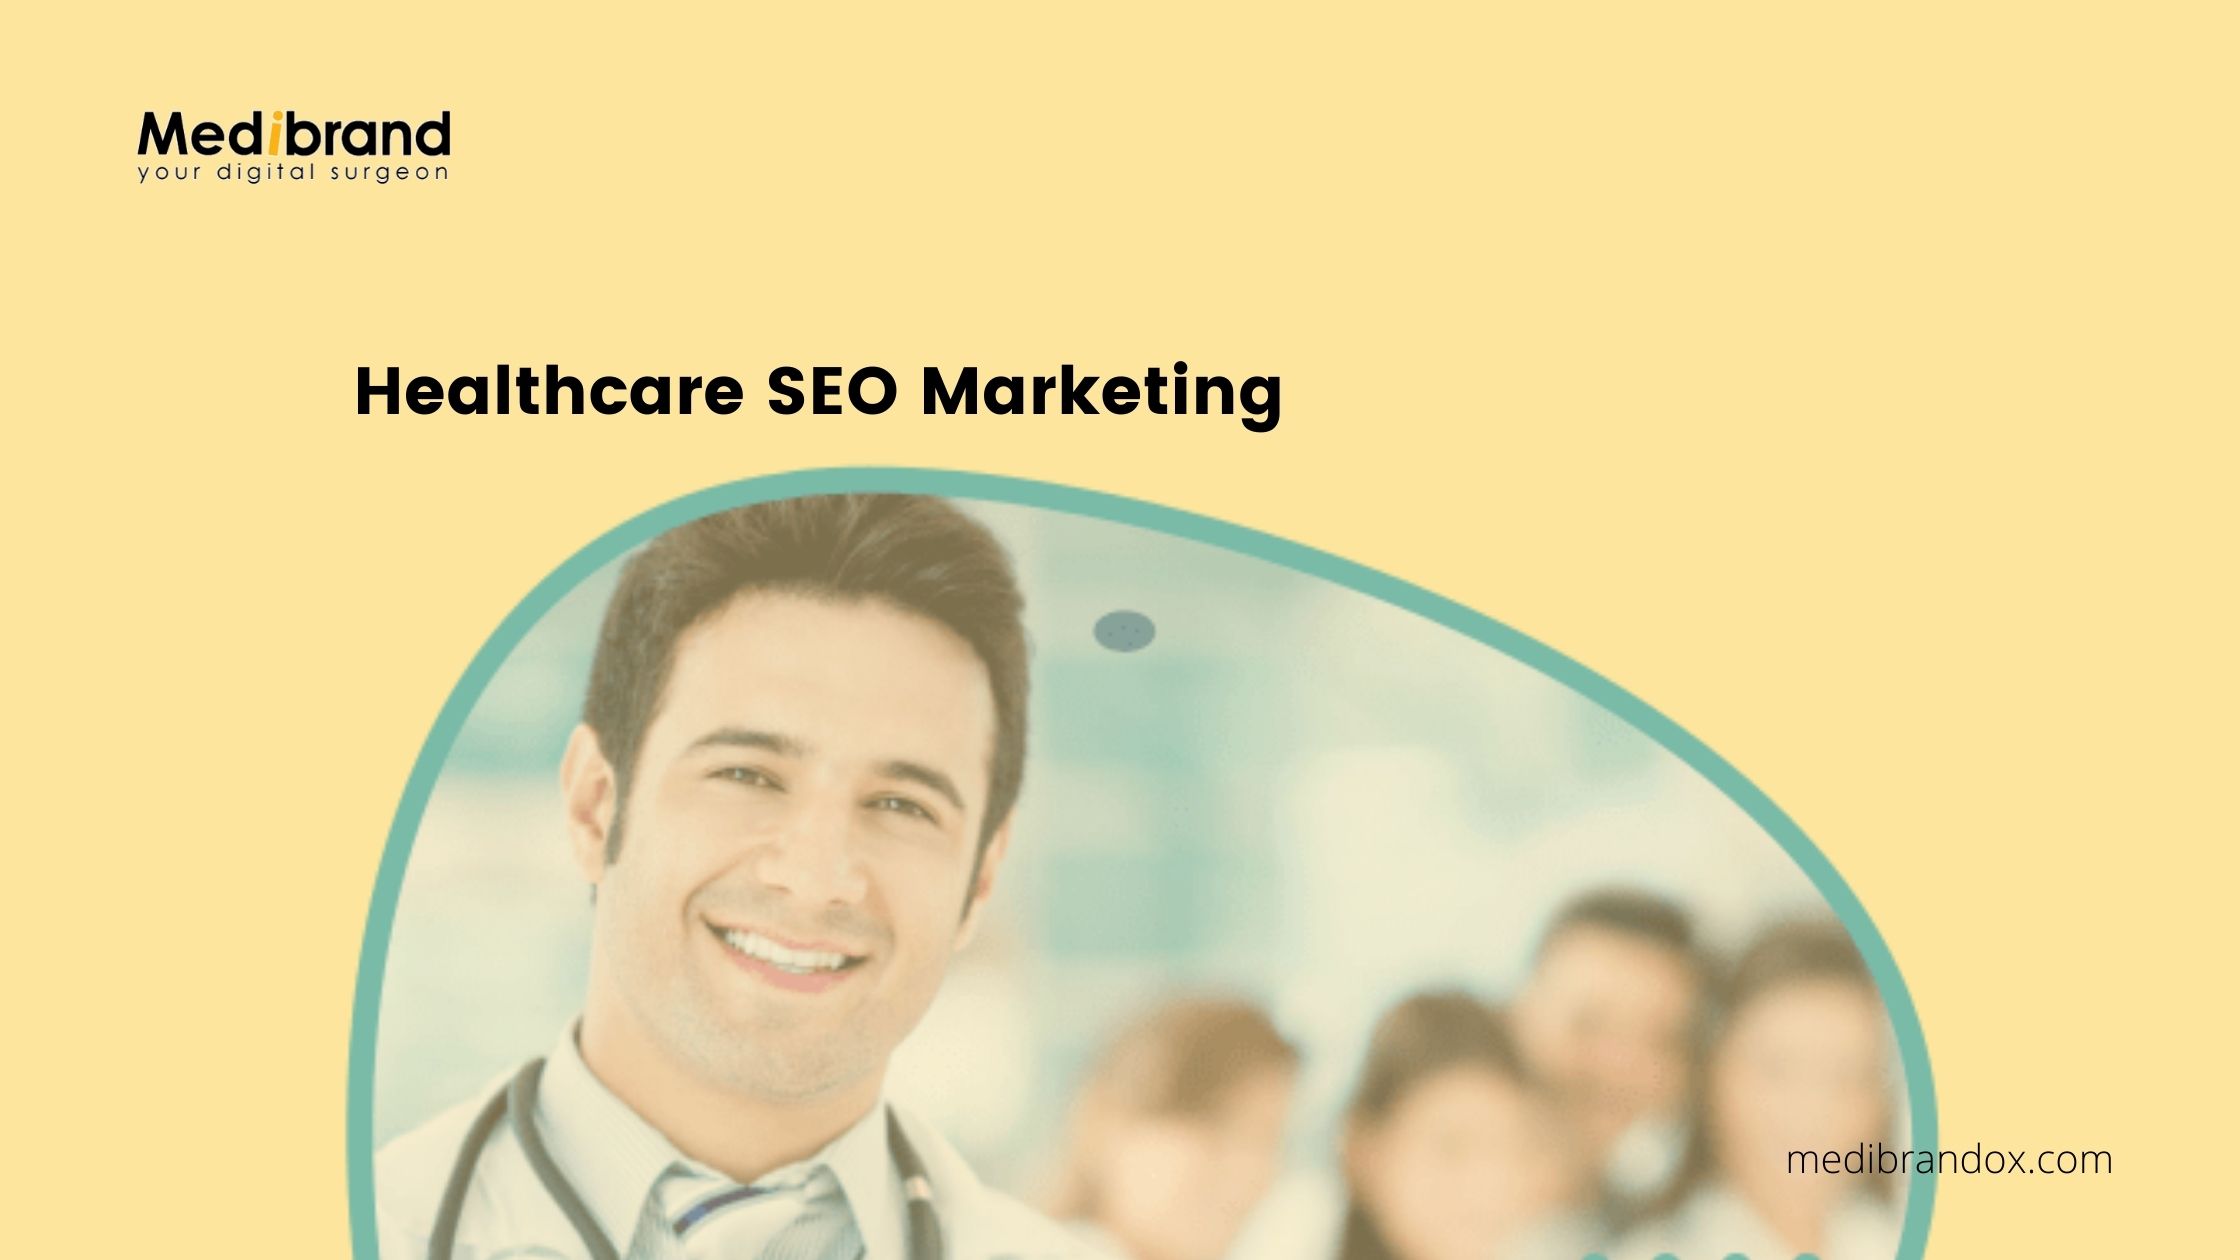 Article about SEO Marketing For Healthcare | Healthcare SEO